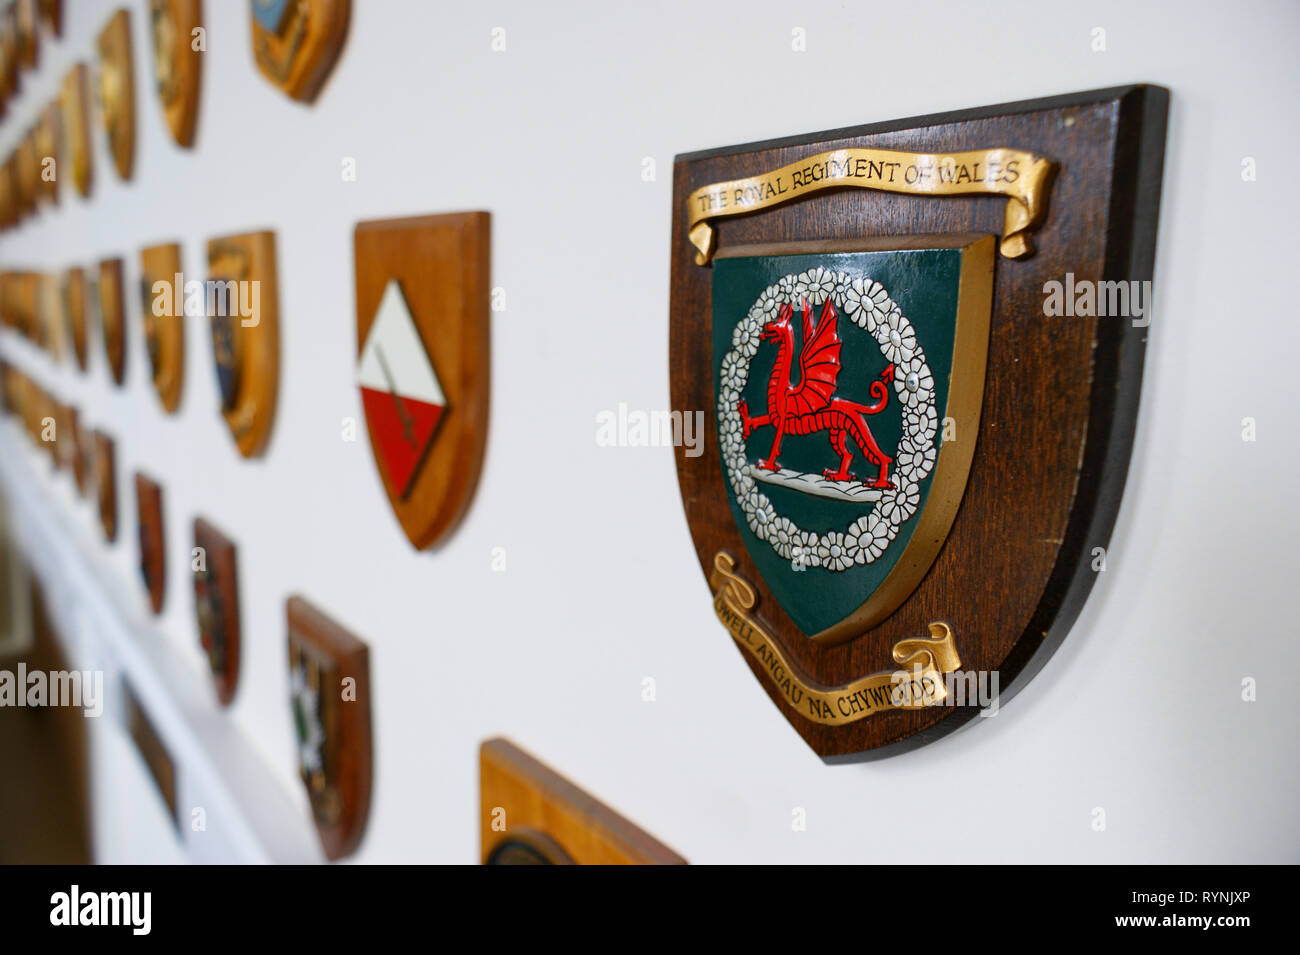 The Royal Regiment of Wales crest on a wooden plaque. Stock Photo